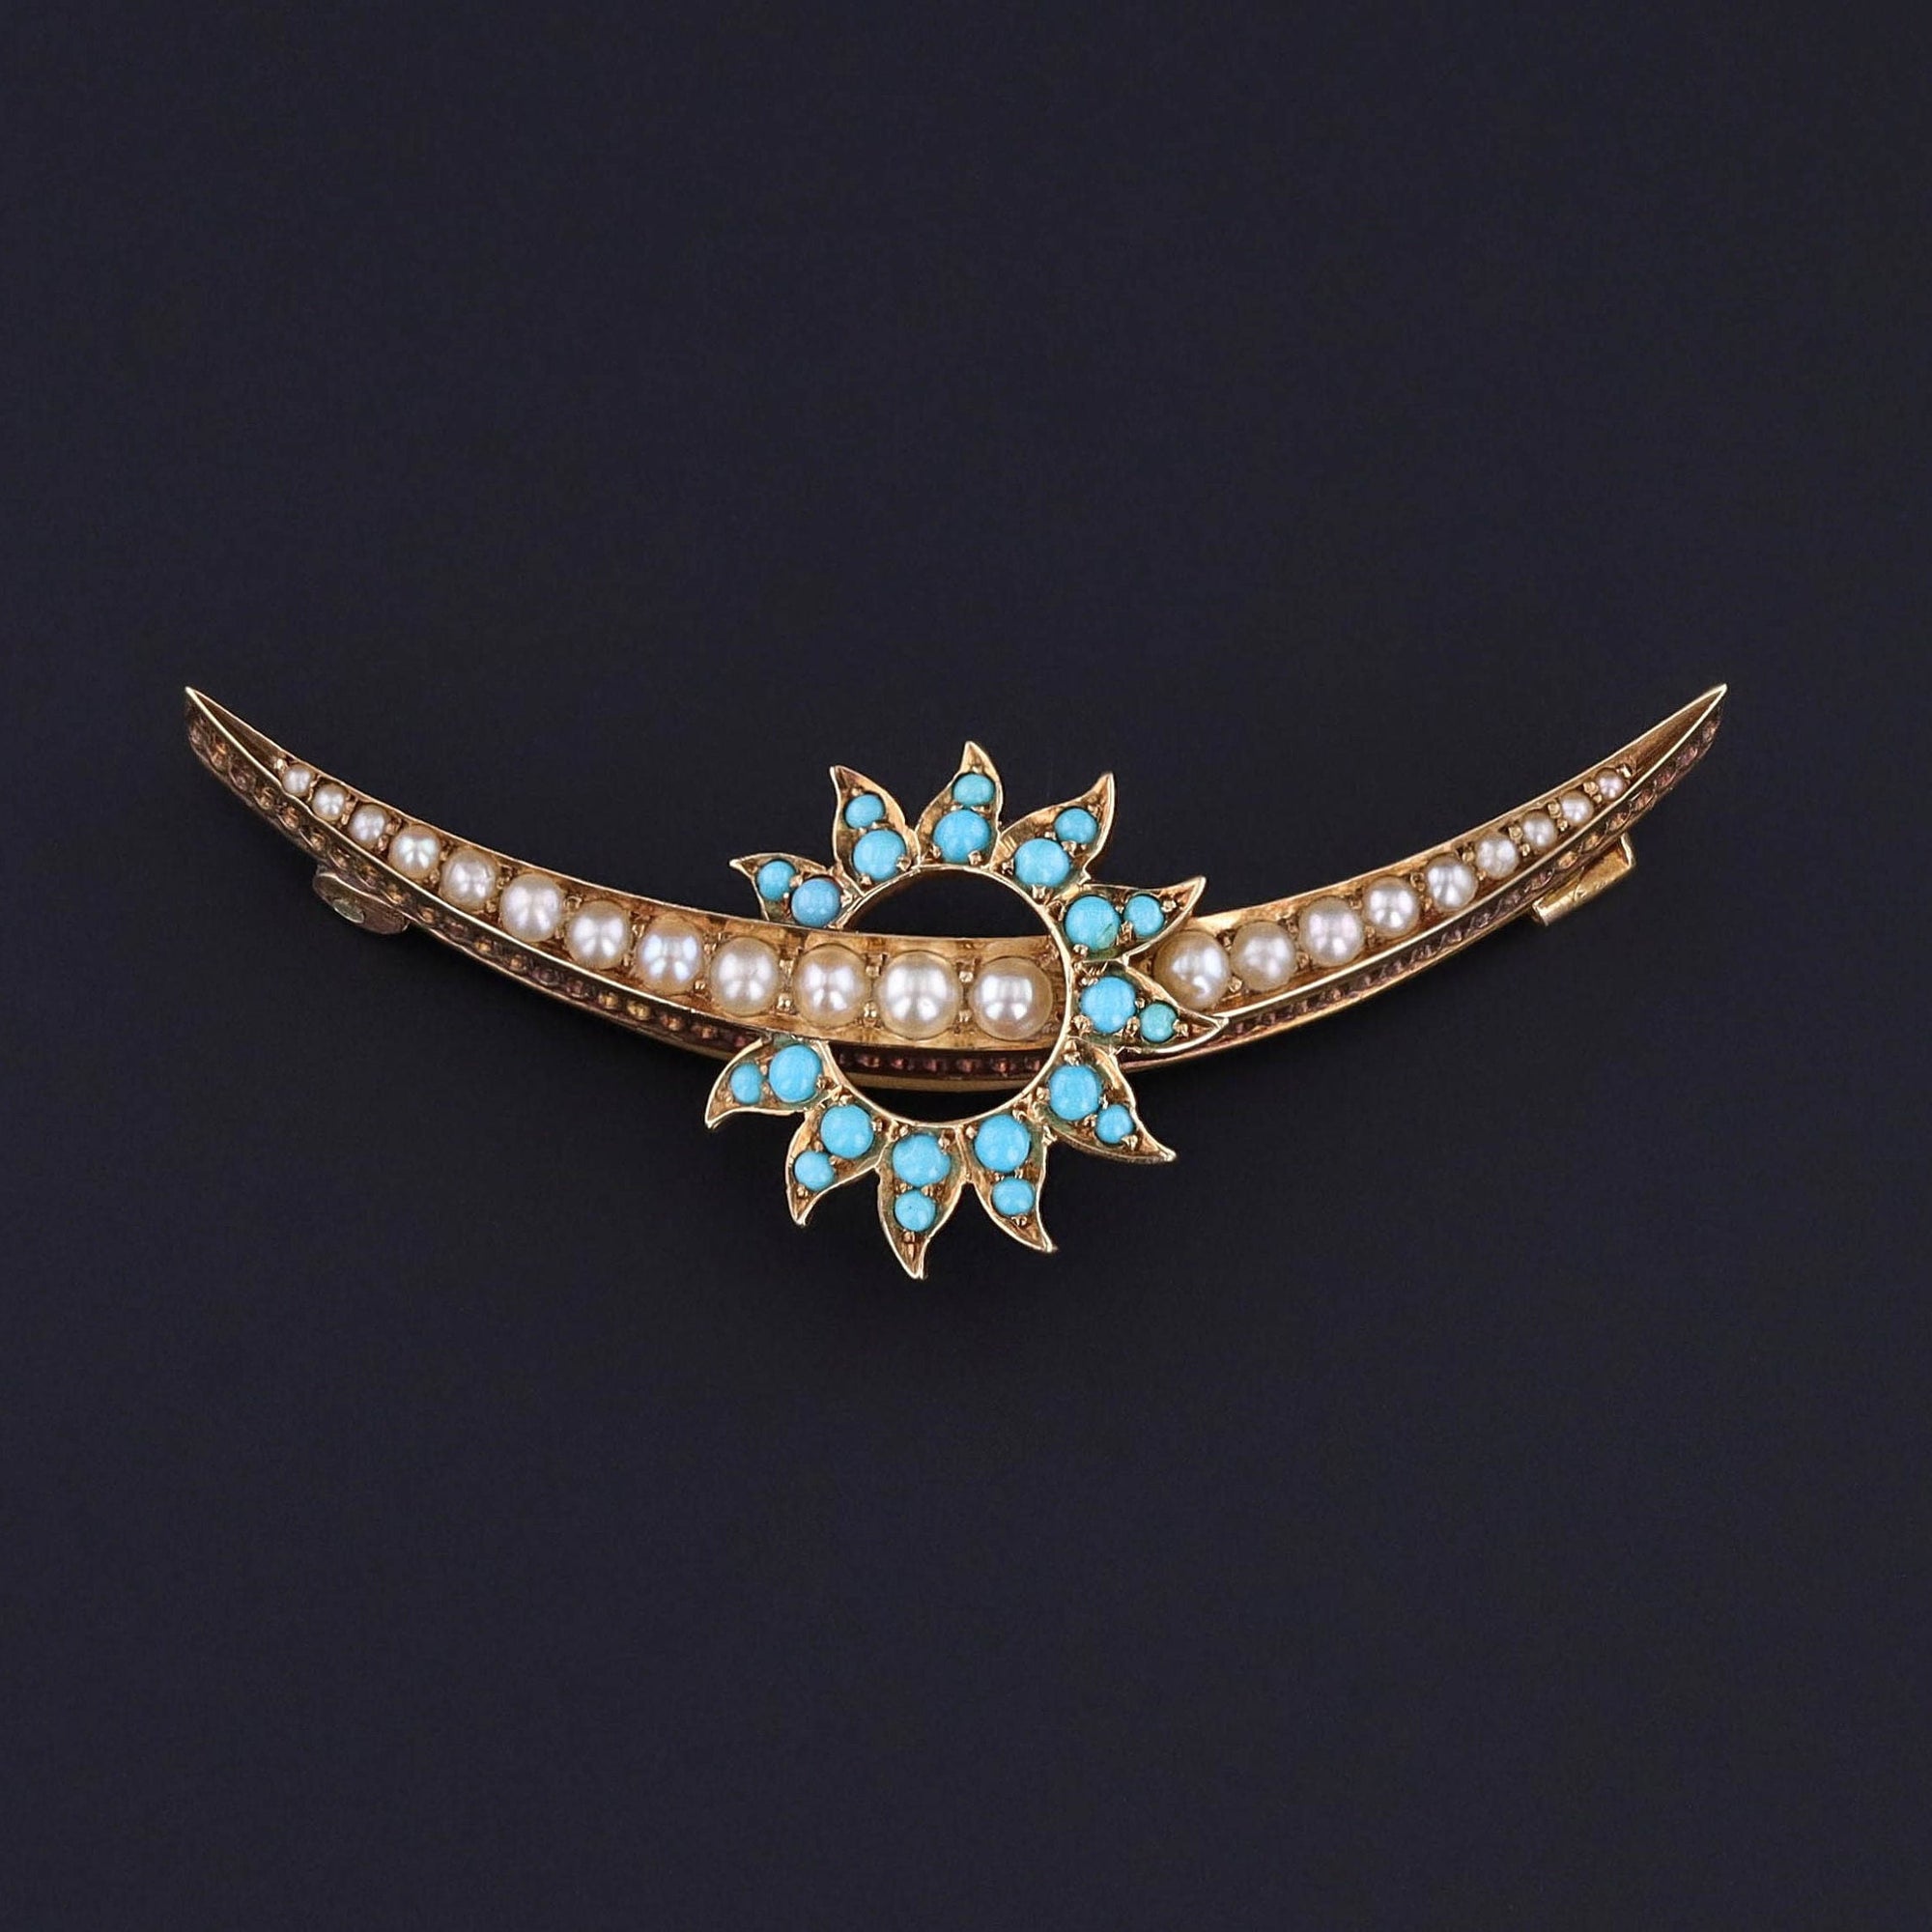 Antique Crescent Moon Brooch:&nbsp; This eye catching brooch features a pearl crescent inside of a turquoise sunburst. The piece is 14k gold and dates to the turn of the 20th century (circa 1890-1910).